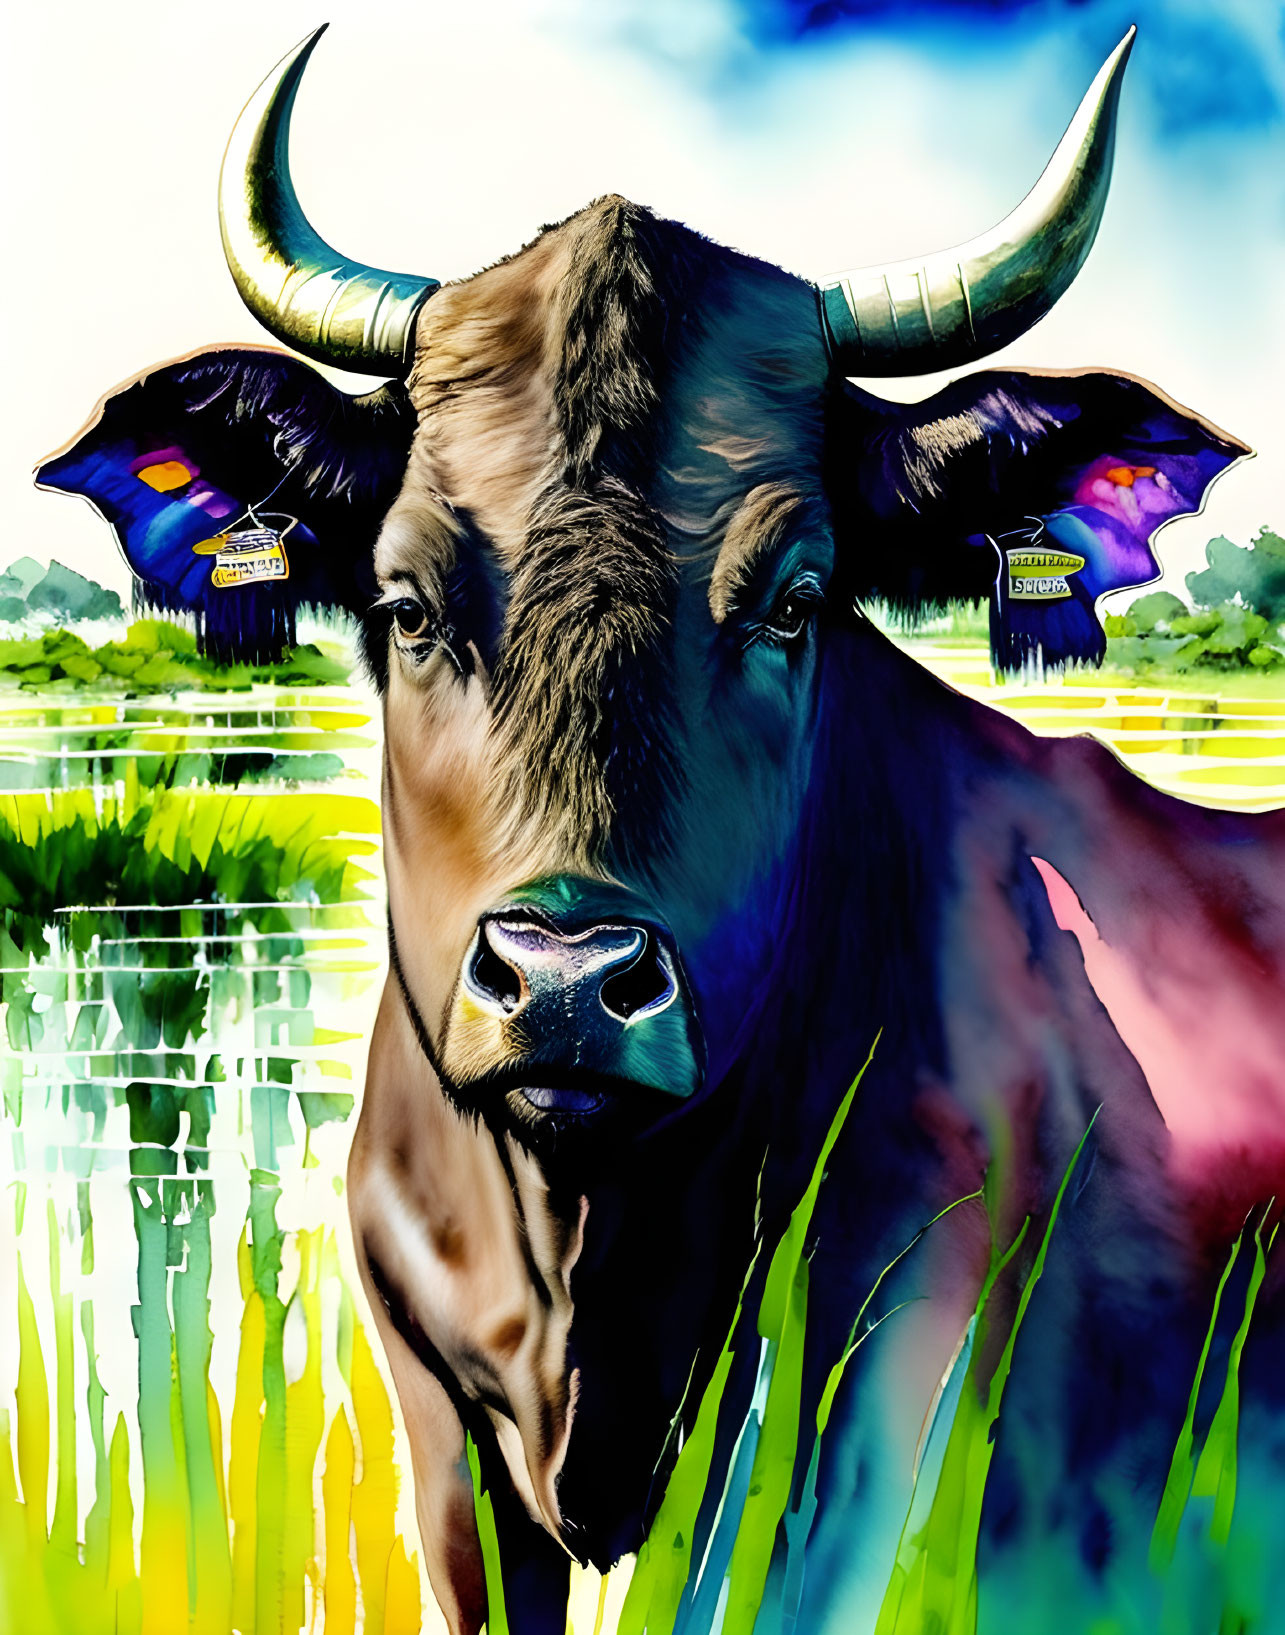 Colorful Digital Artwork: Cow's Head with Horns on Bright Background